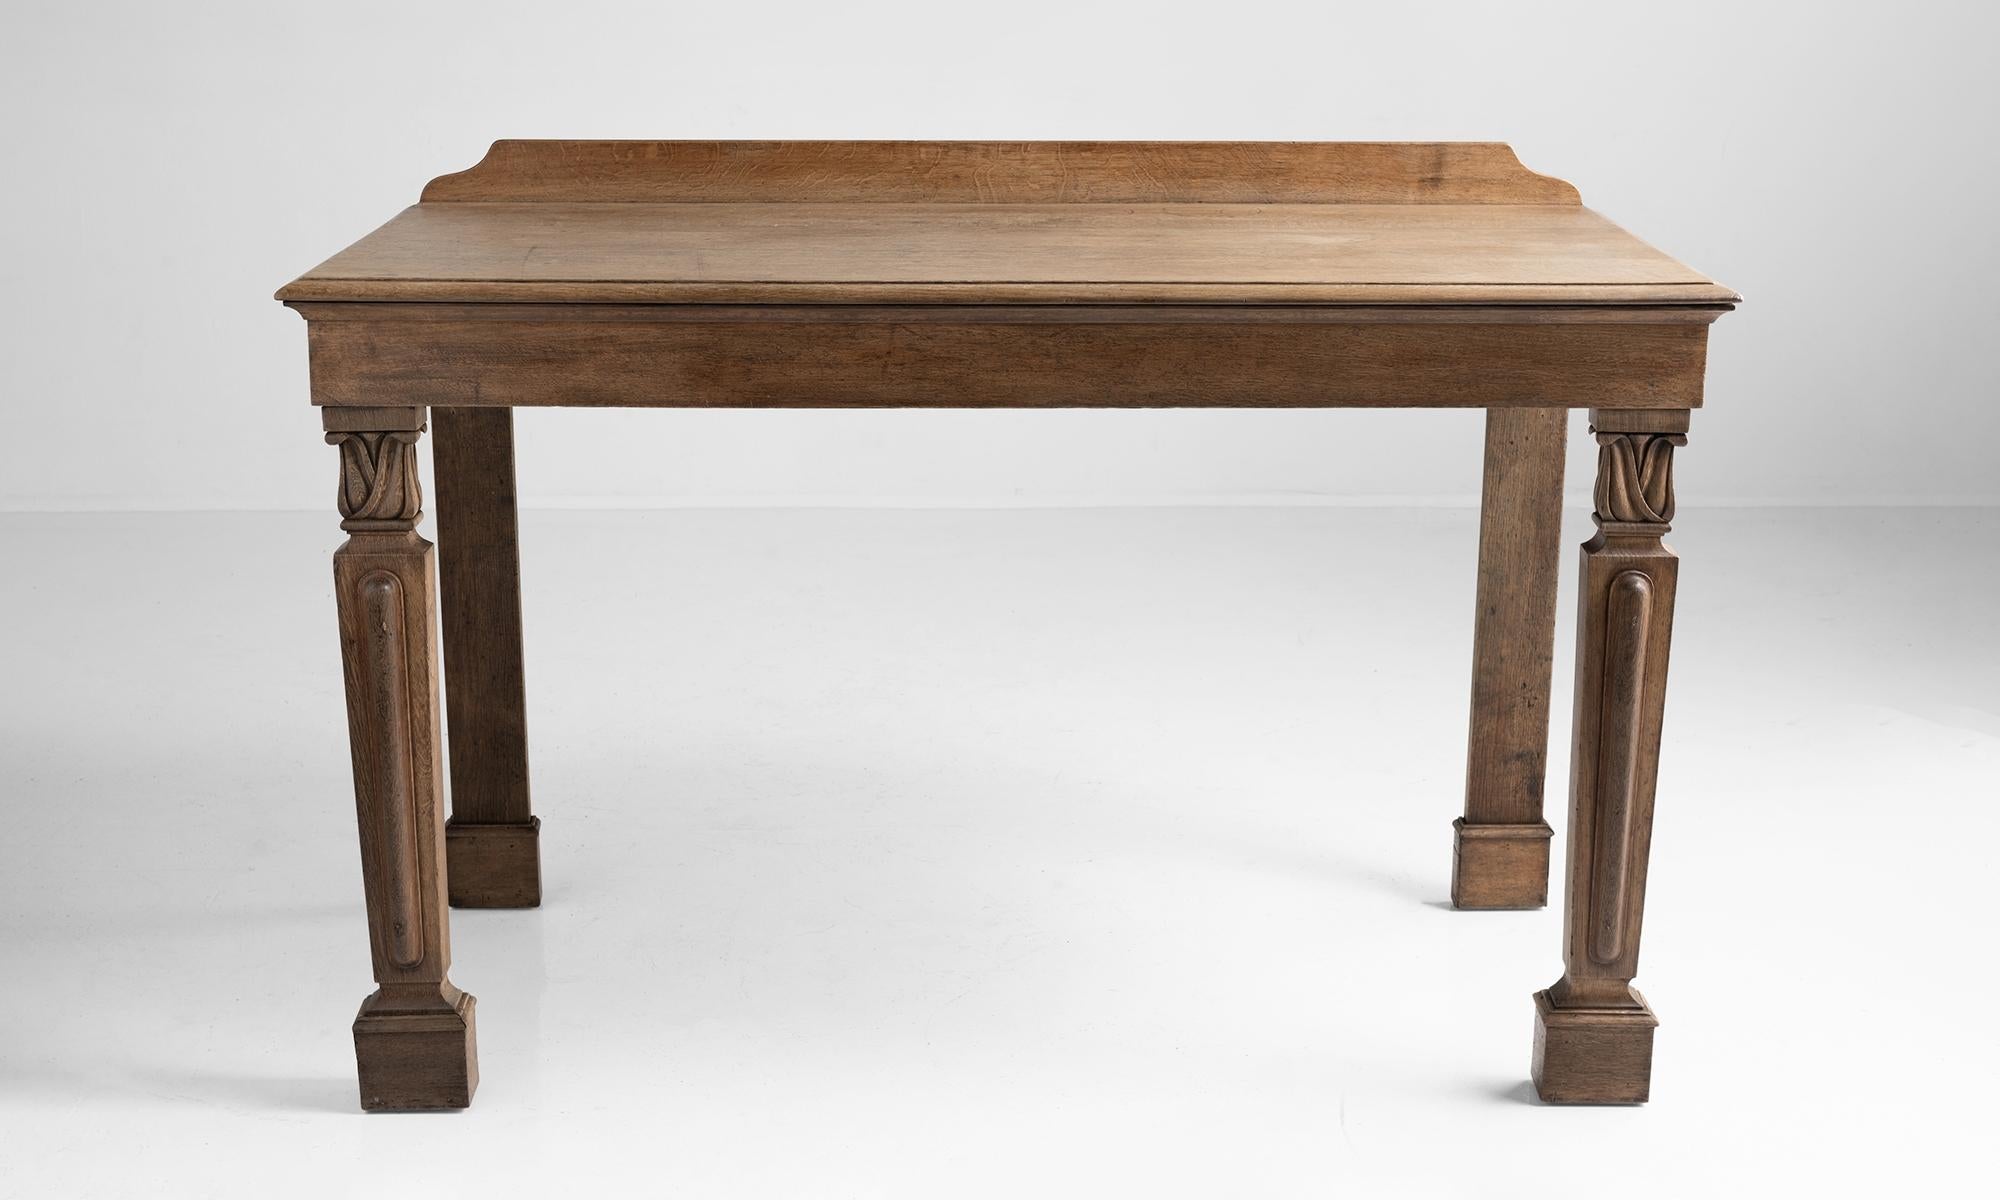 Large oak console with carved front legs and moulded edge.